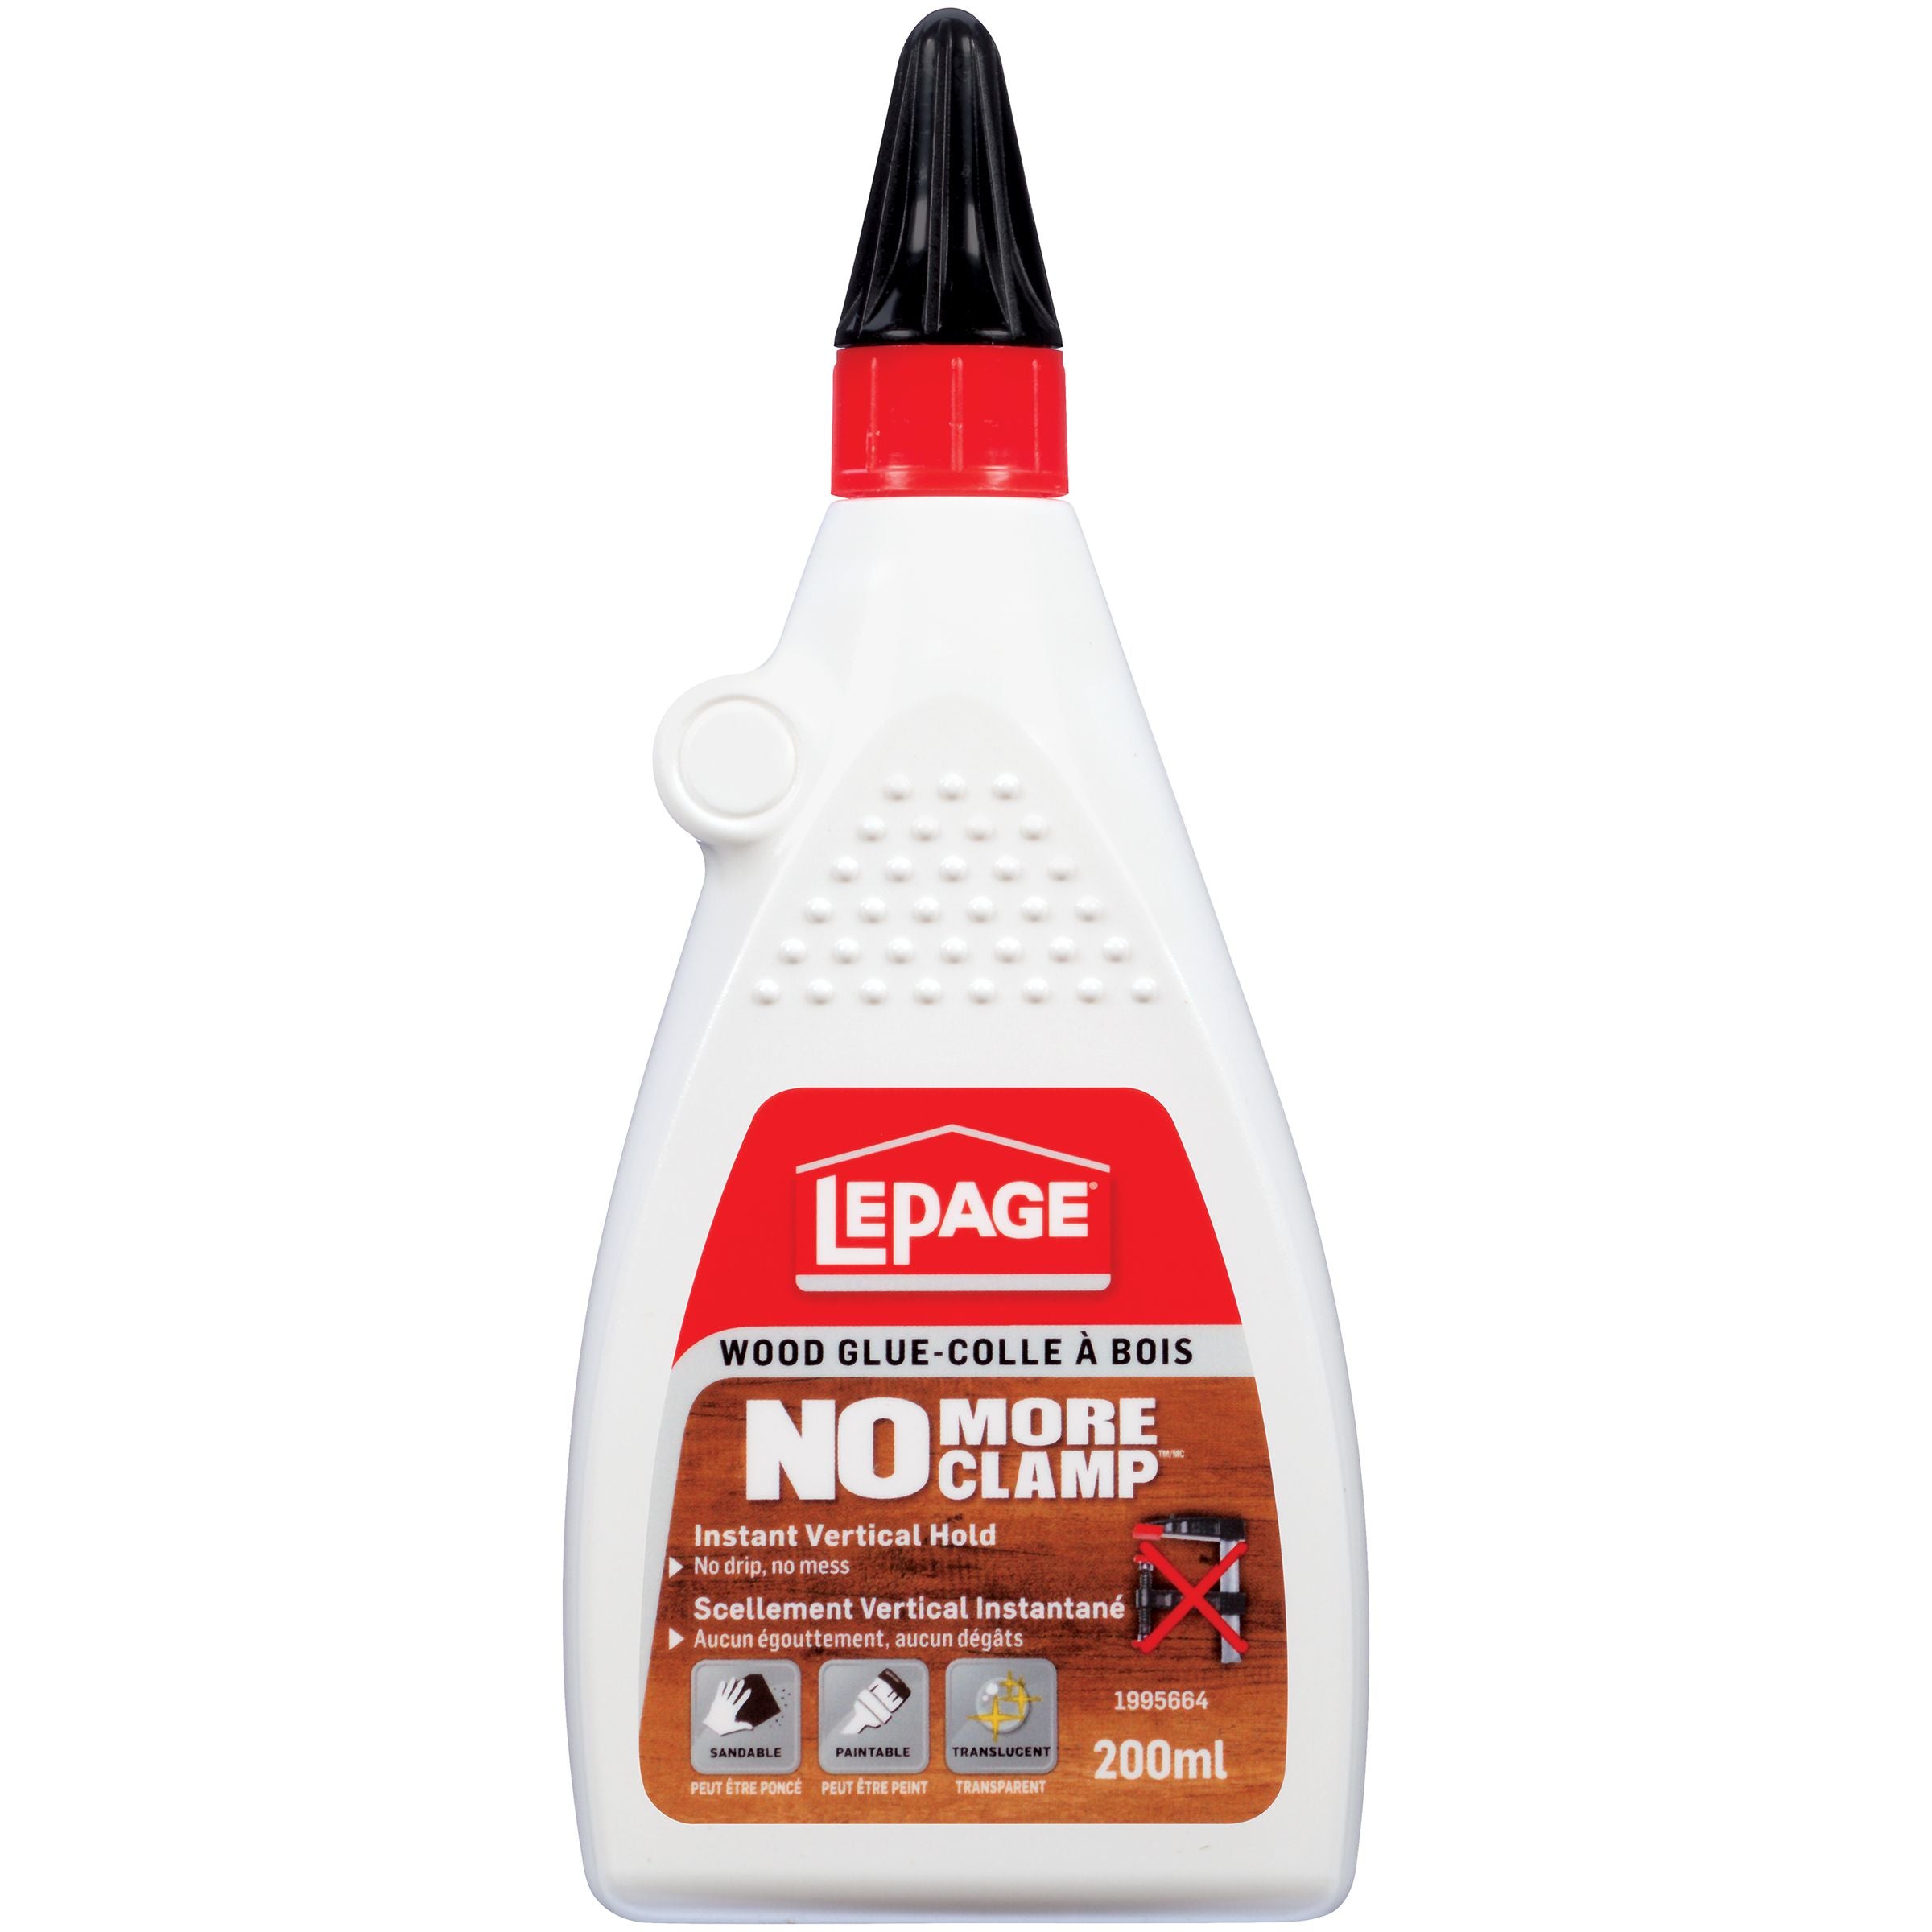 LePage No More Clamp Wood Glue, Clear, 200 ml Bottle, Pack of 1